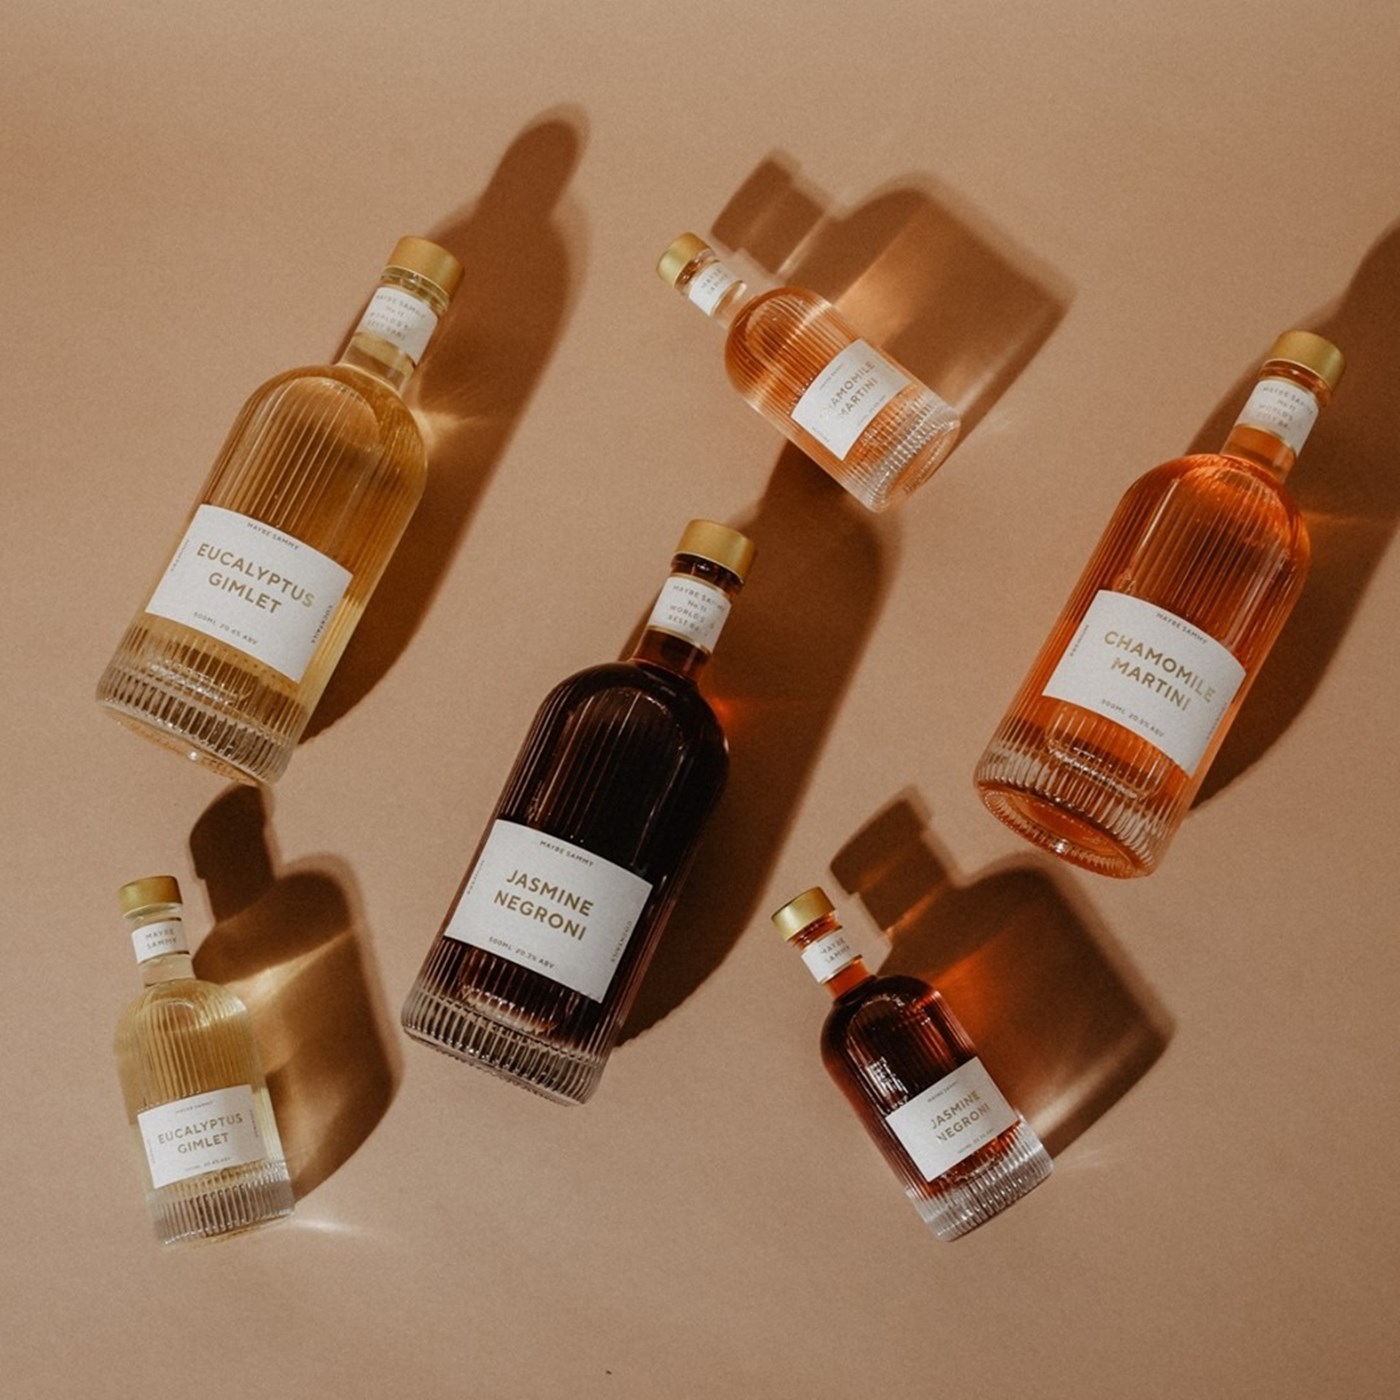 An array of mini and full-sized bottles cocktails from Maybe Sammy against a peach background. 